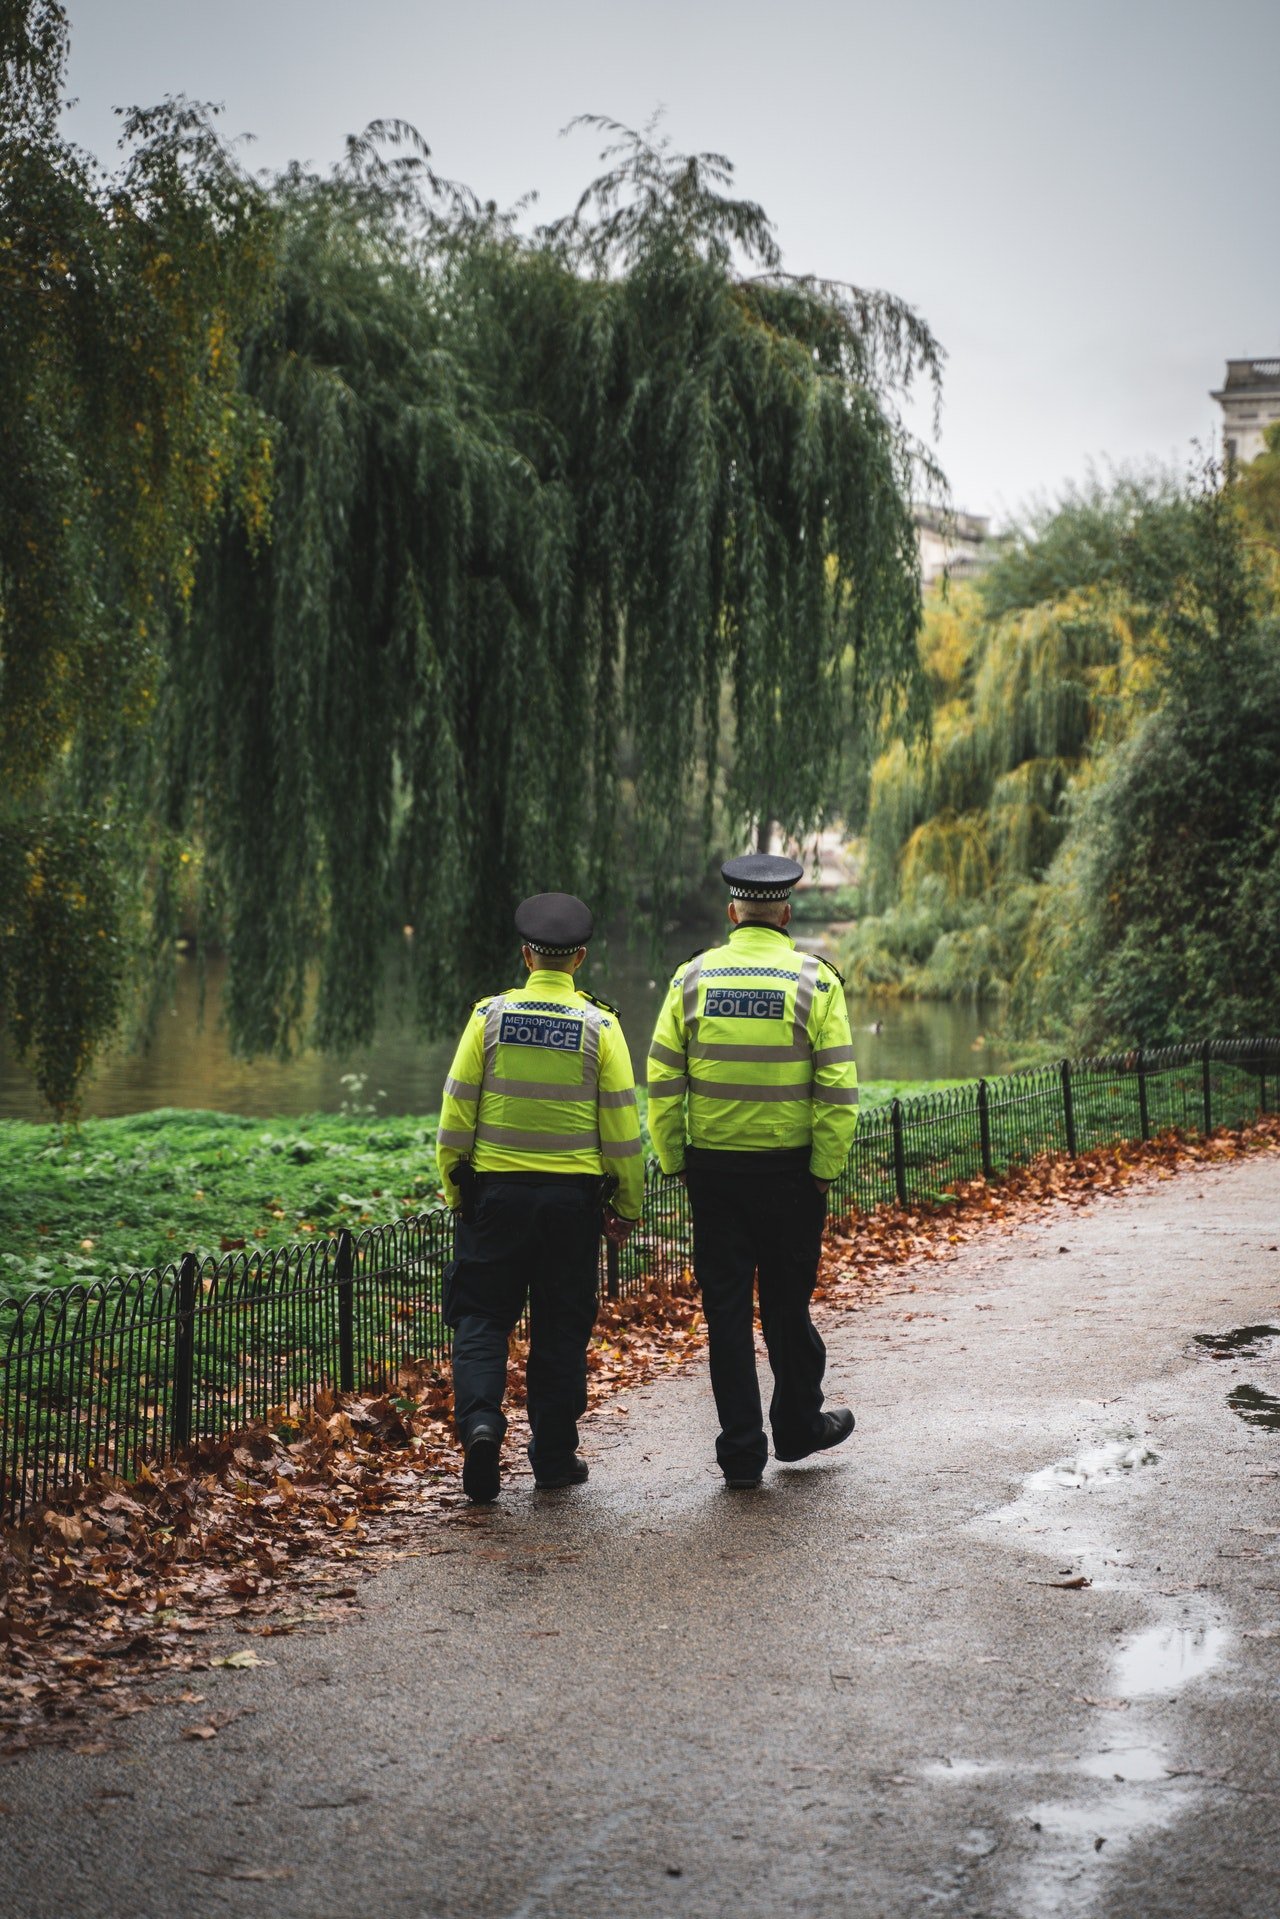 Photo of two police officers walking on the road | Photo: Pexels